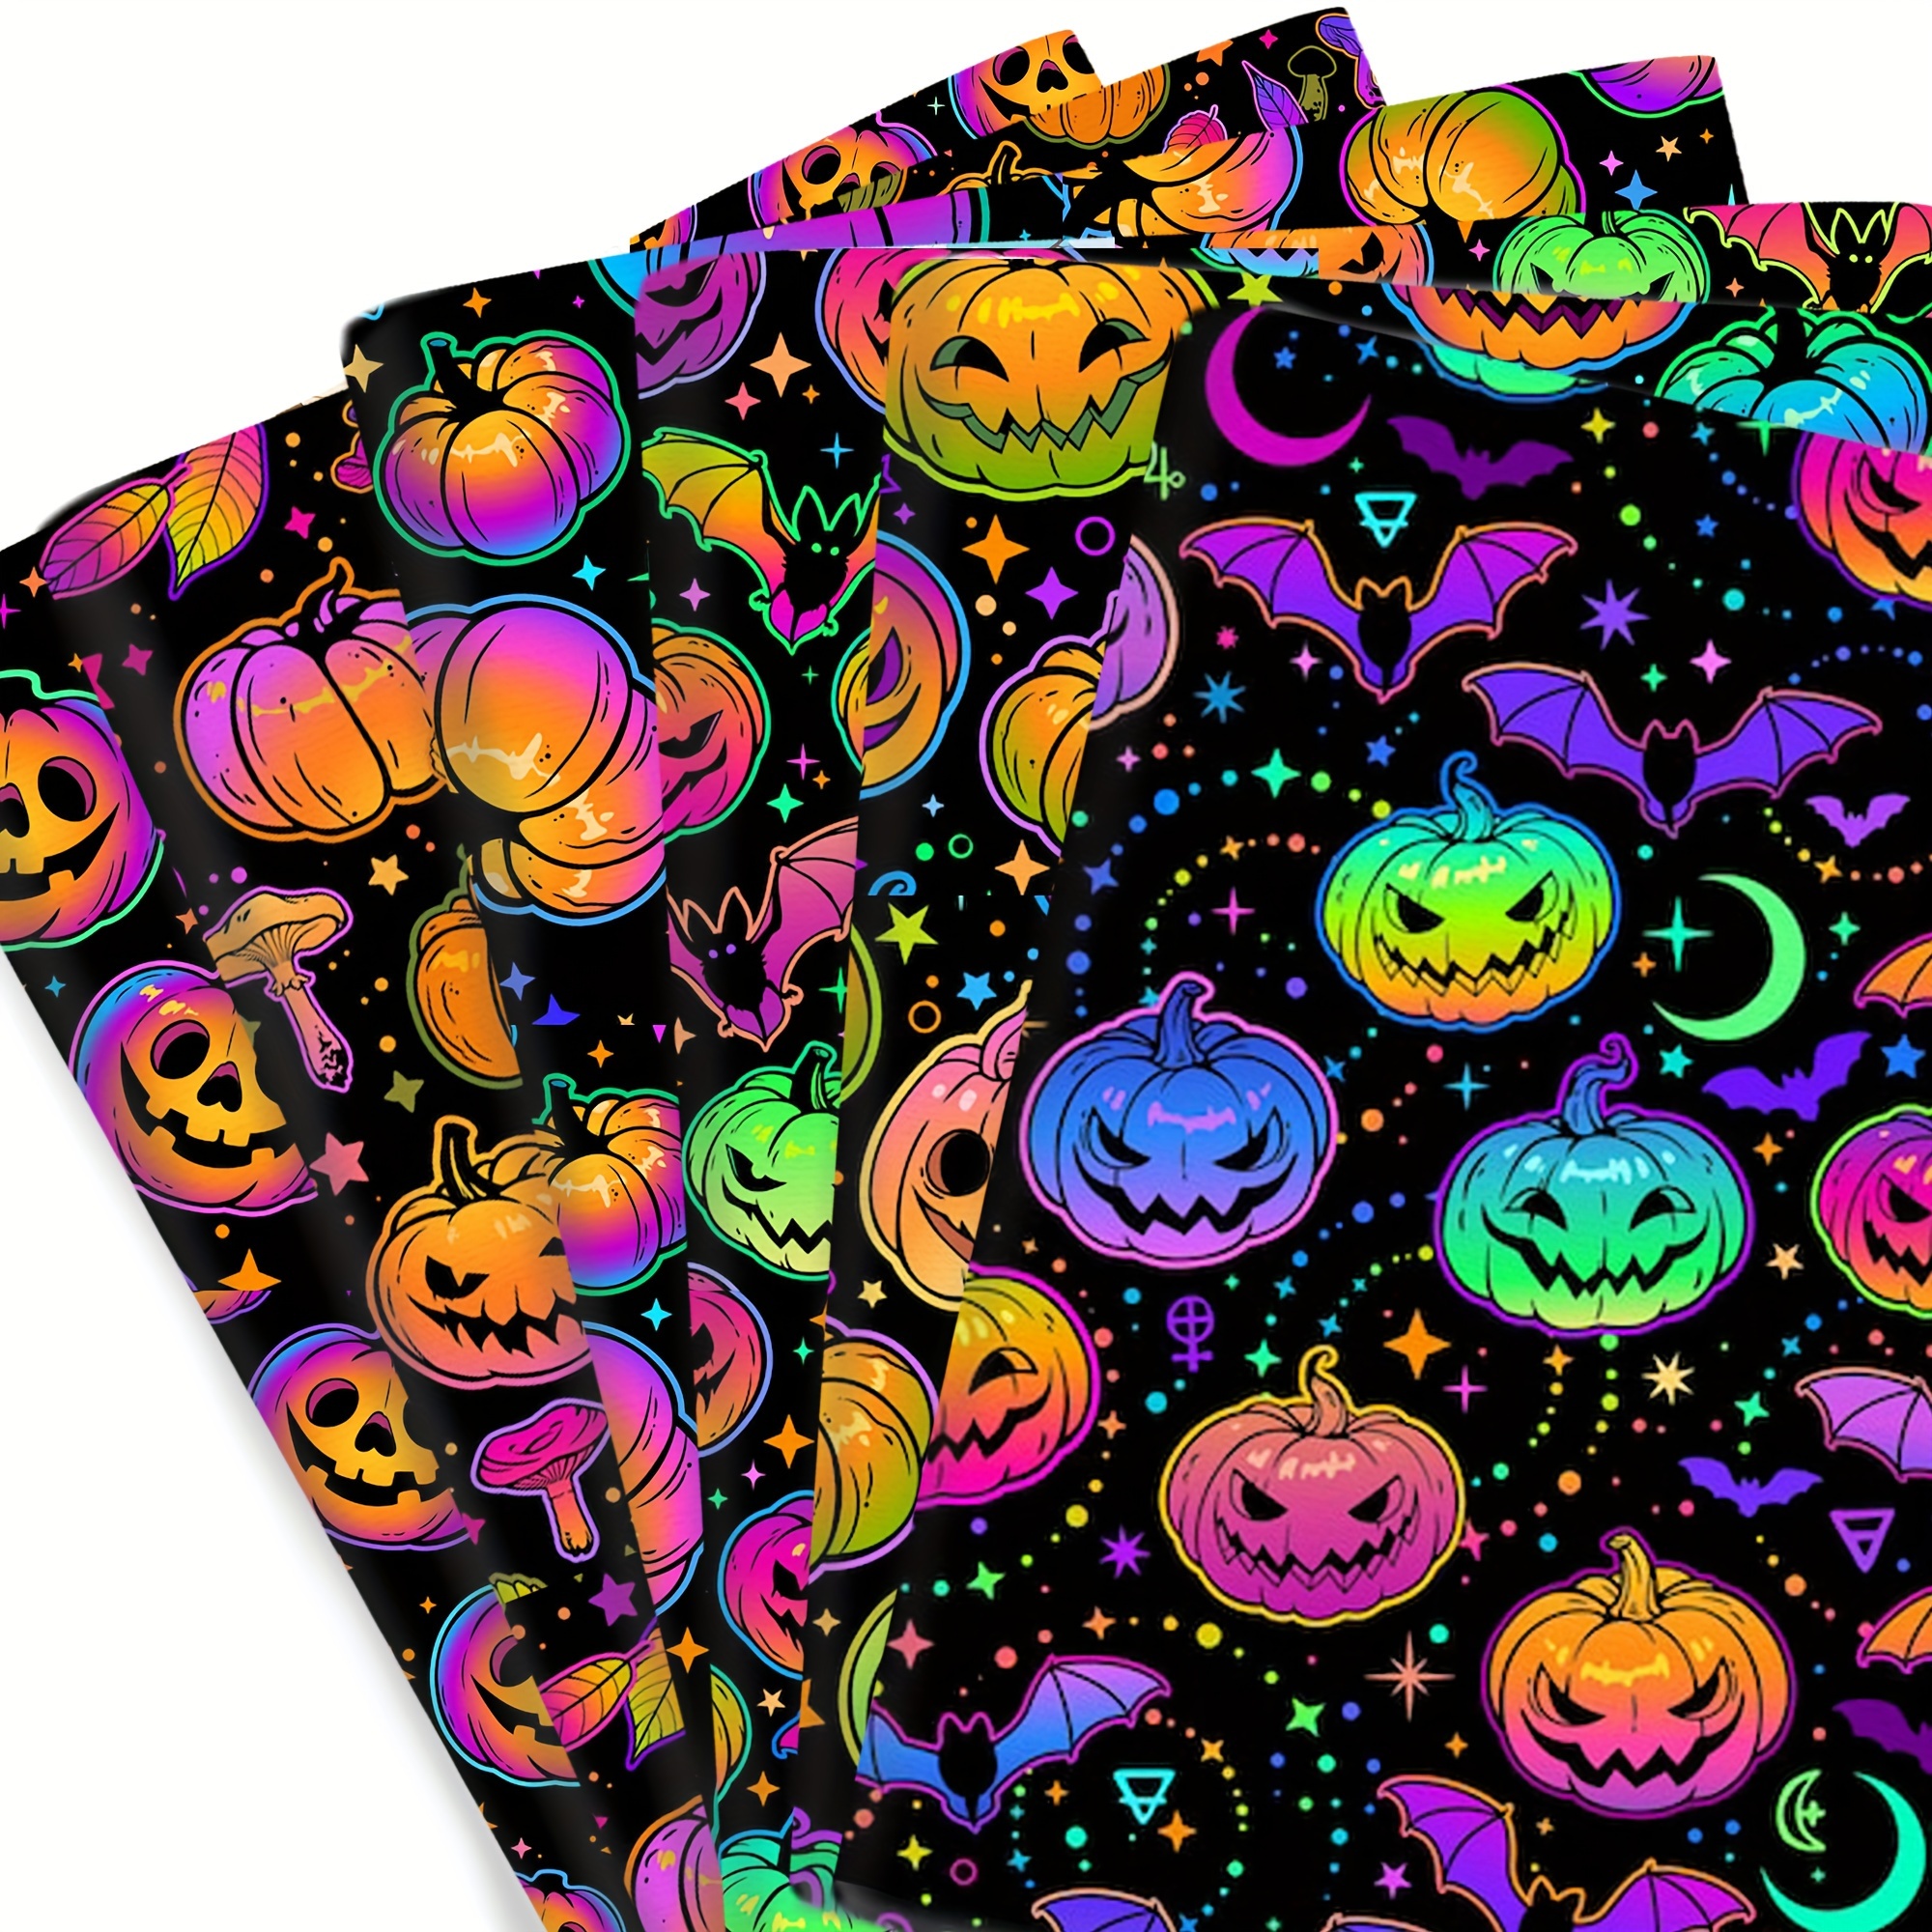 

spooky Elegance" Halloween Craft Fabric - 57x19.68" Glossy Purple With Moon, Pumpkin & Bat Design | Pre-cut Polyester Cotton Blend For Diy Doll Clothes, Quilting, Tablecloths, Aprons, Bags & Pillows